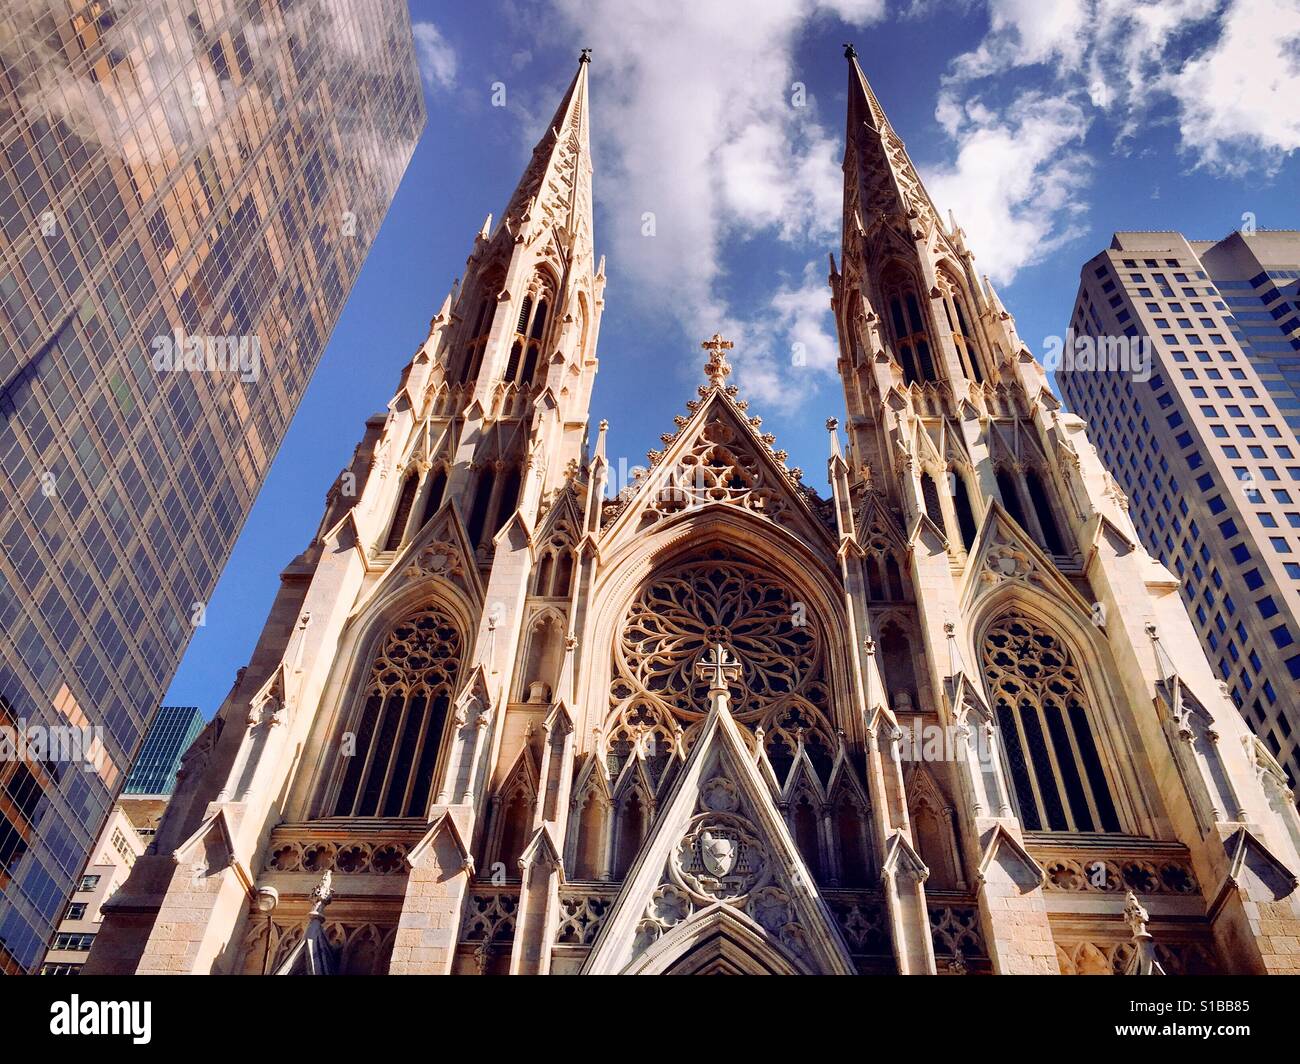 Entrance and spires of St. Patrick's Cathedral, fifth Avenue, NYC, USA. Stock Photo